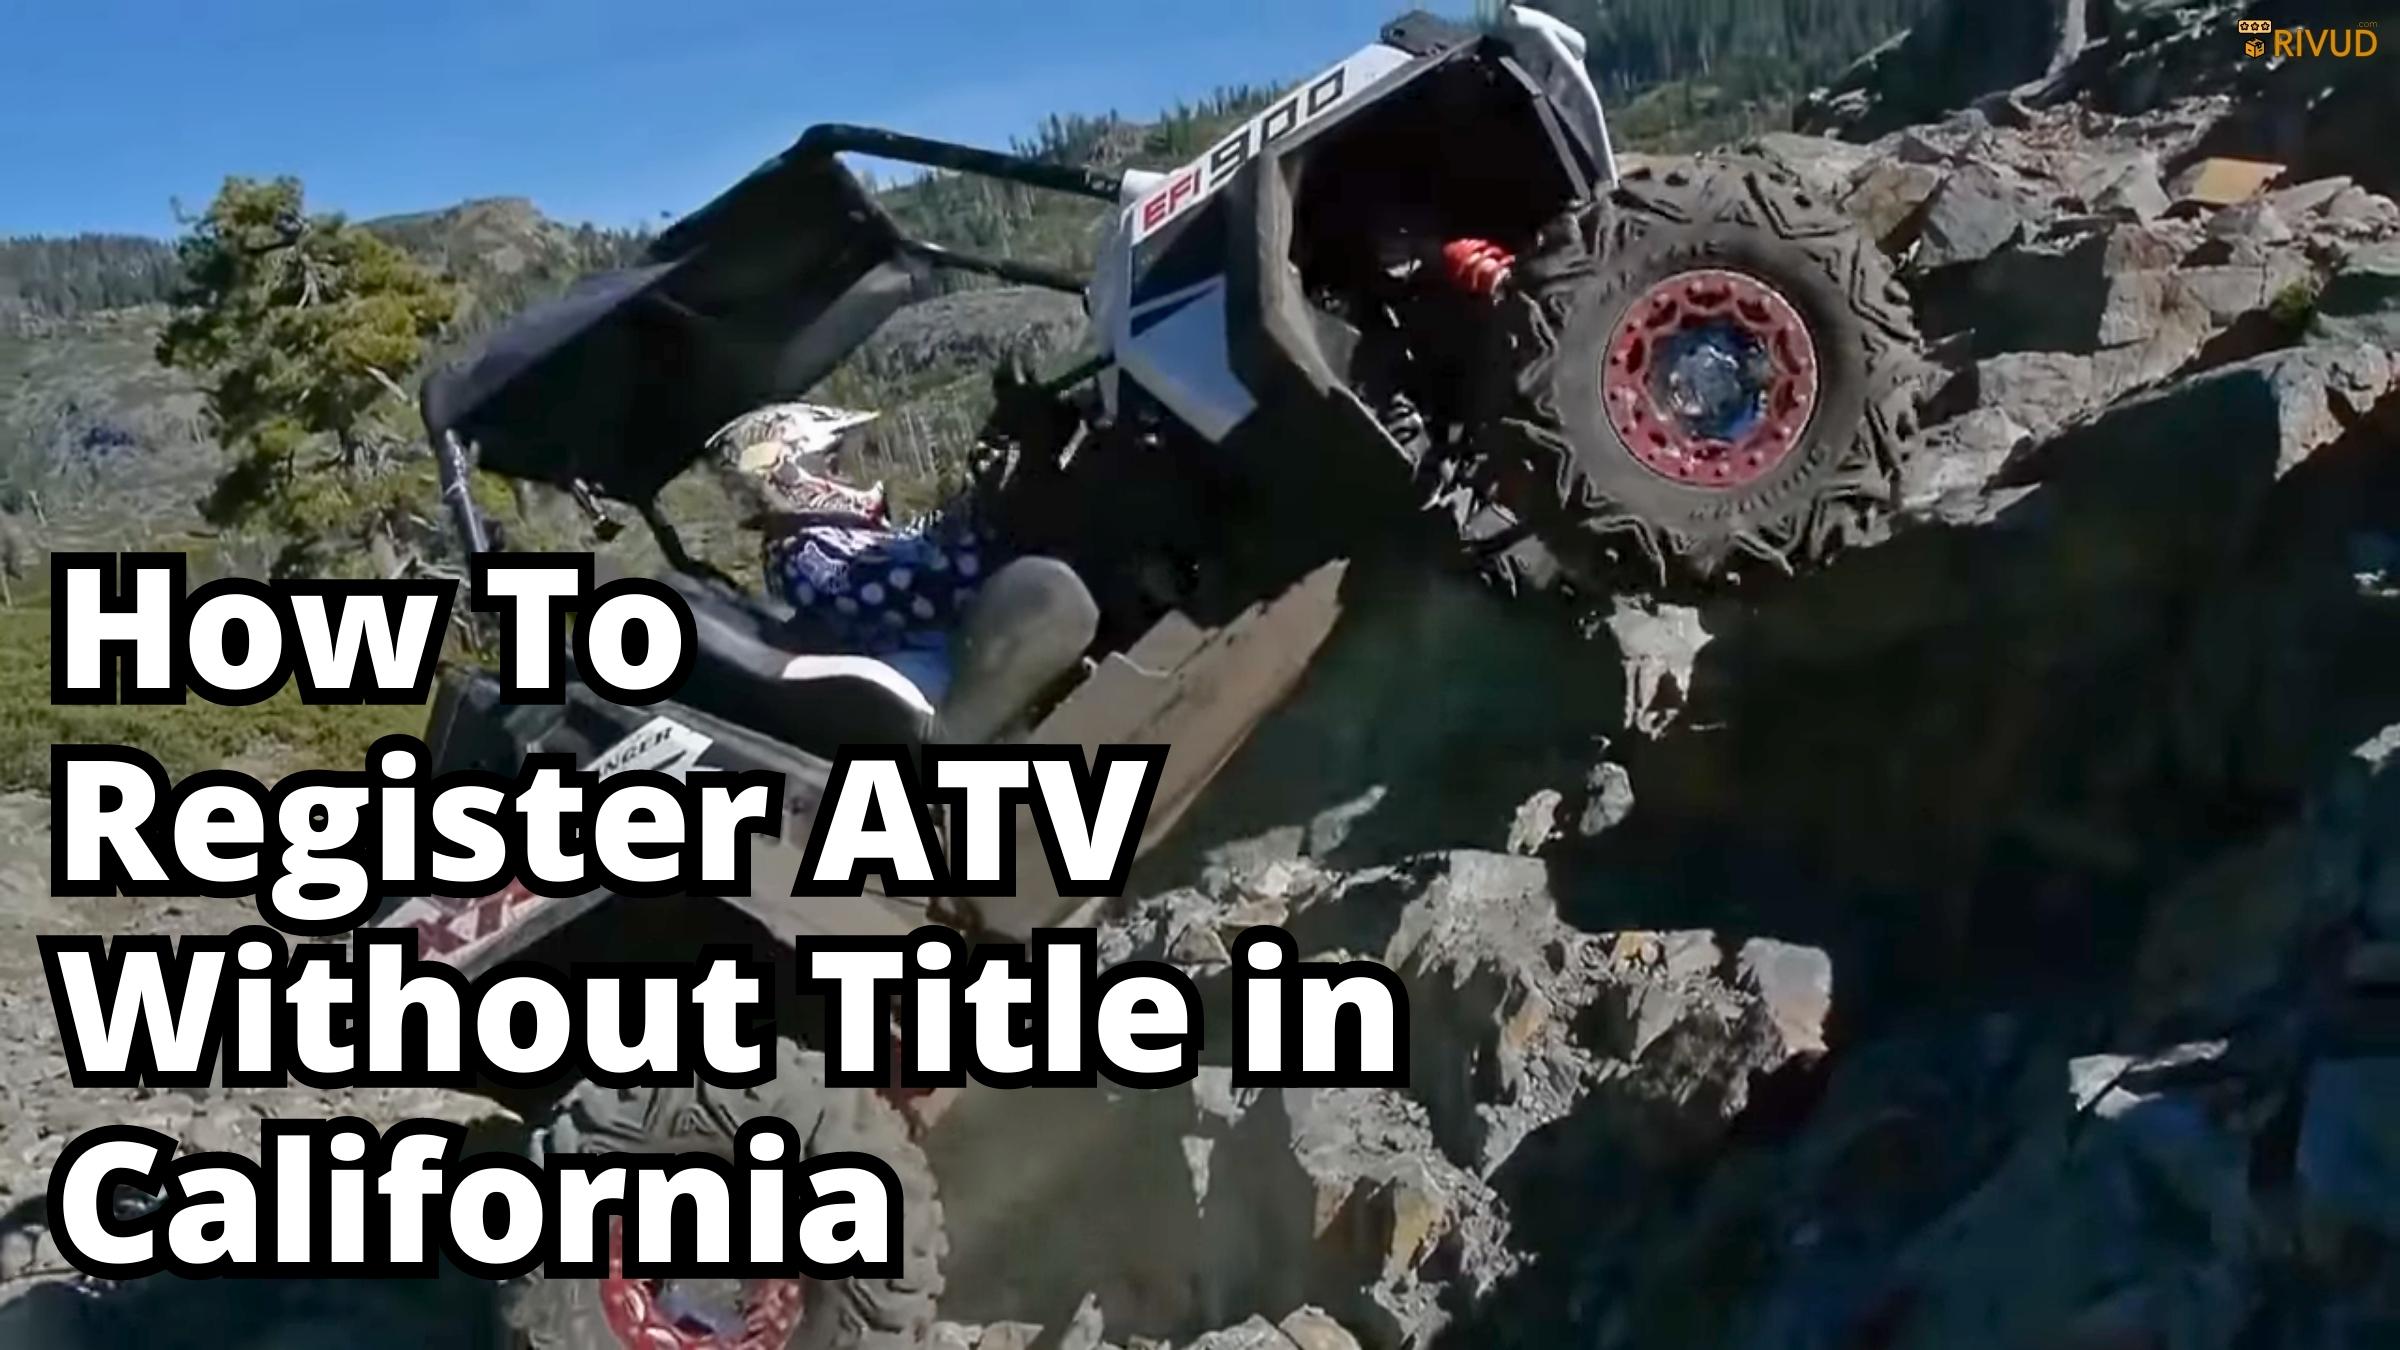 How To Register Atv Without Title In California?